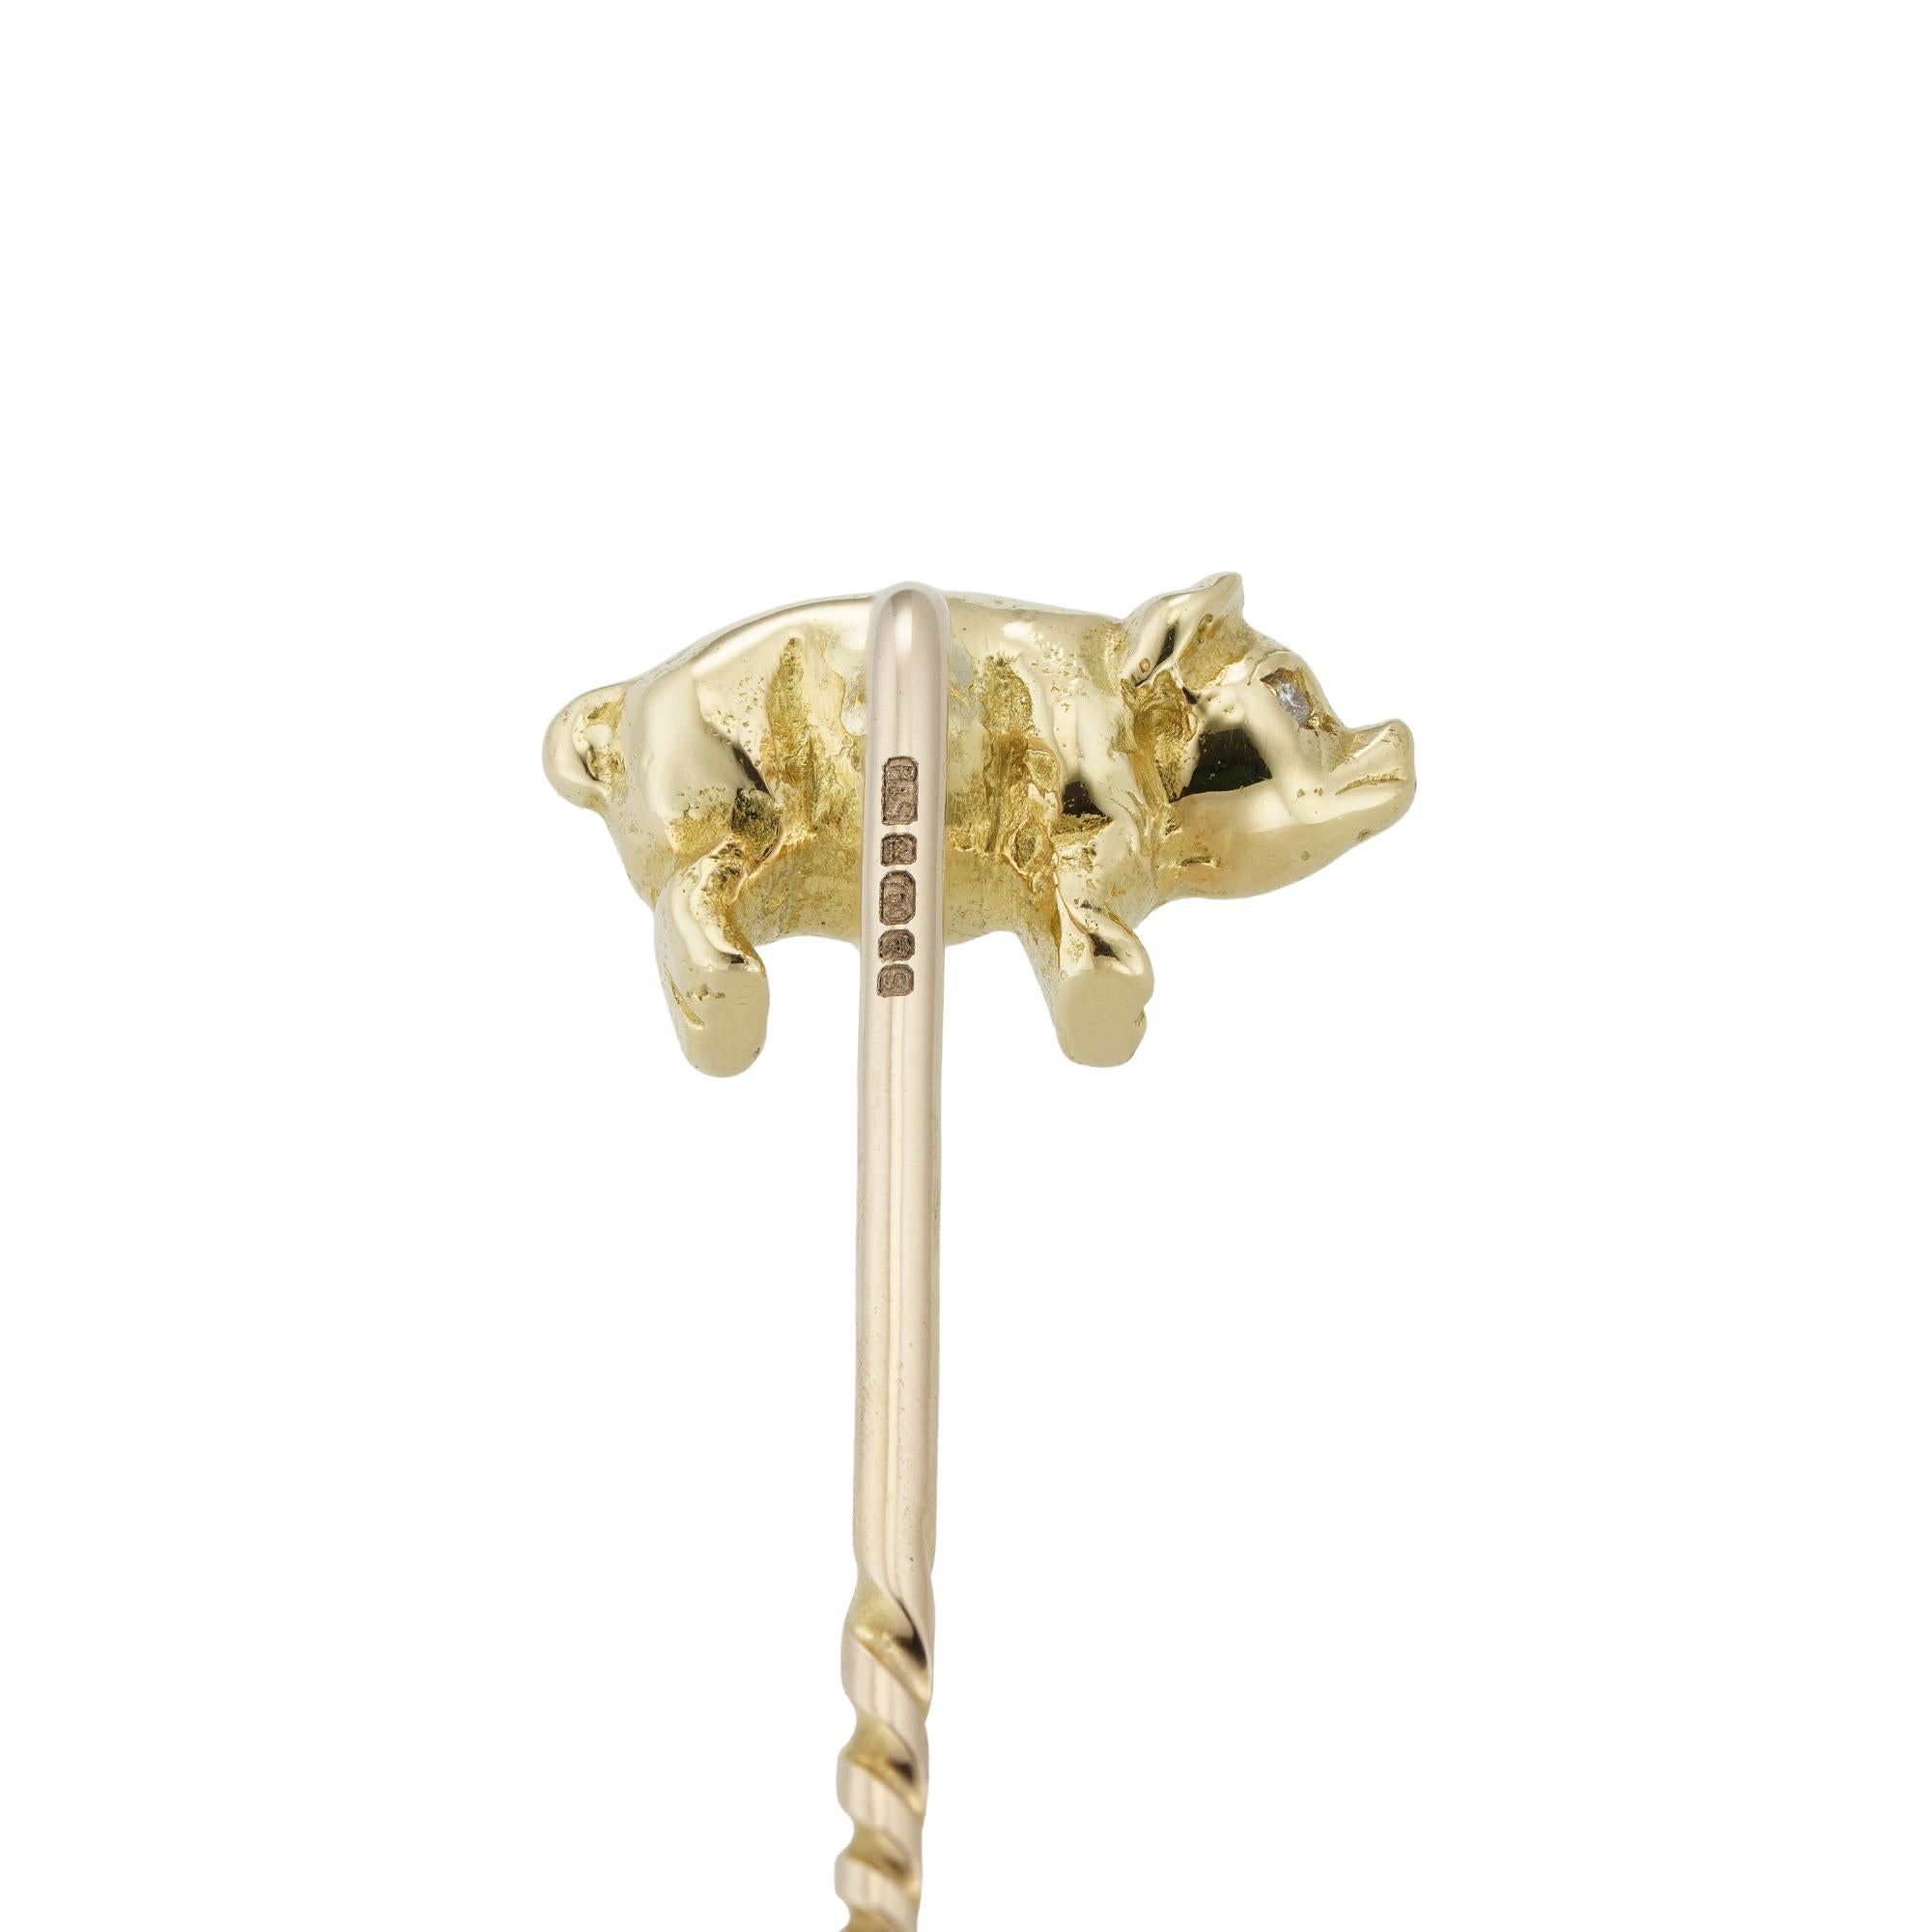 A yellow gold stickpin, the finial in the form of a pig, all set in yellow gold, hallmarked 18 carat gold, London, made by Bentley & Skinner, measuring 1.3 x 0.7cm, with 6.4cm long, gross weight 3.9 grams.

A fun yellow stick pin. Pigs are seen as